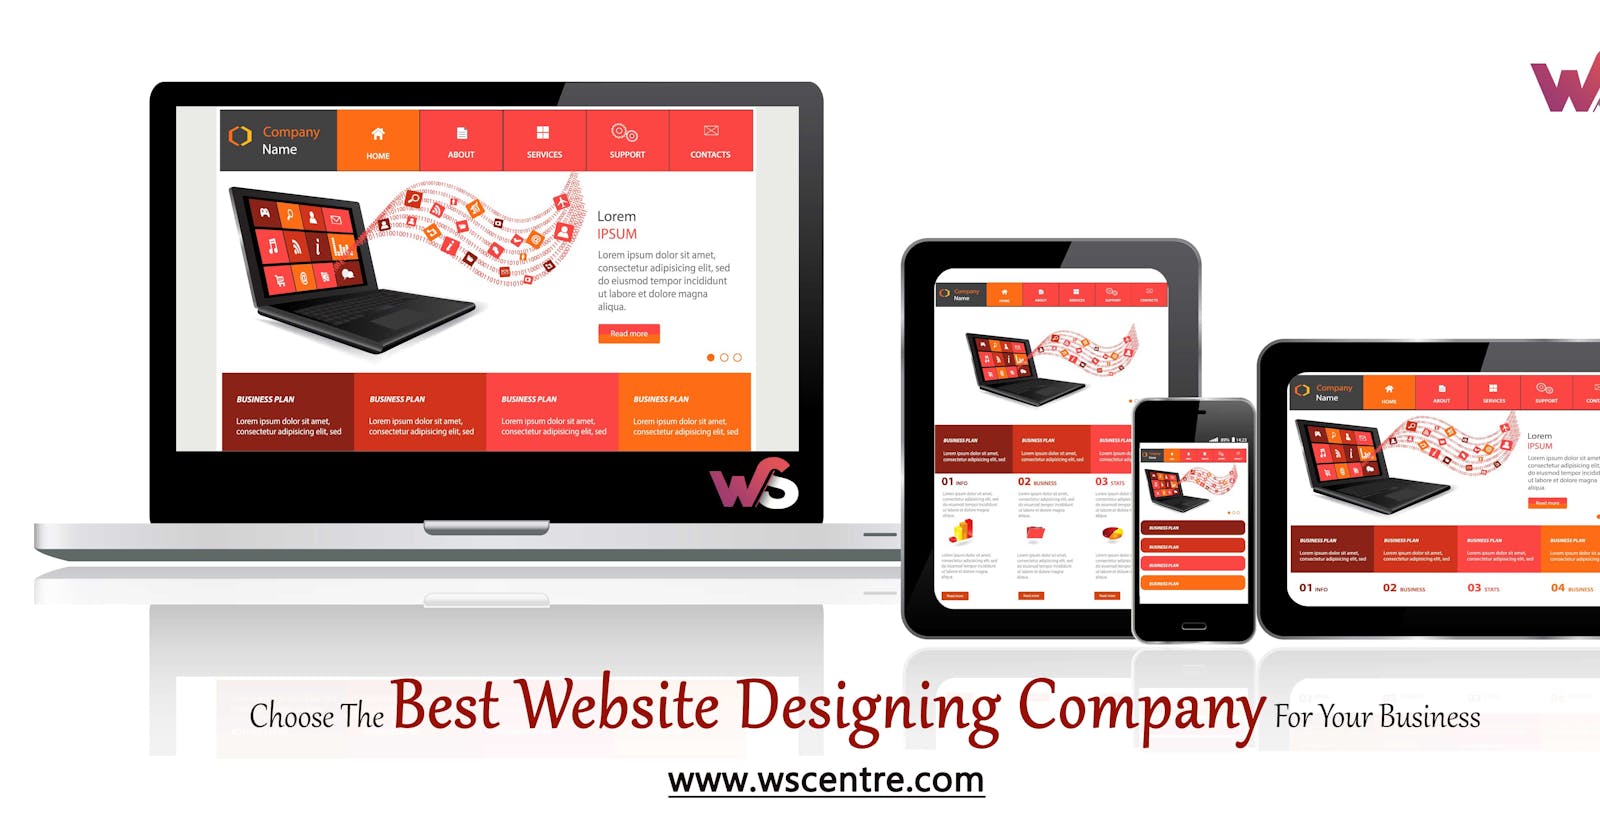 How To Choose The Best Website Designing Company For Your Business